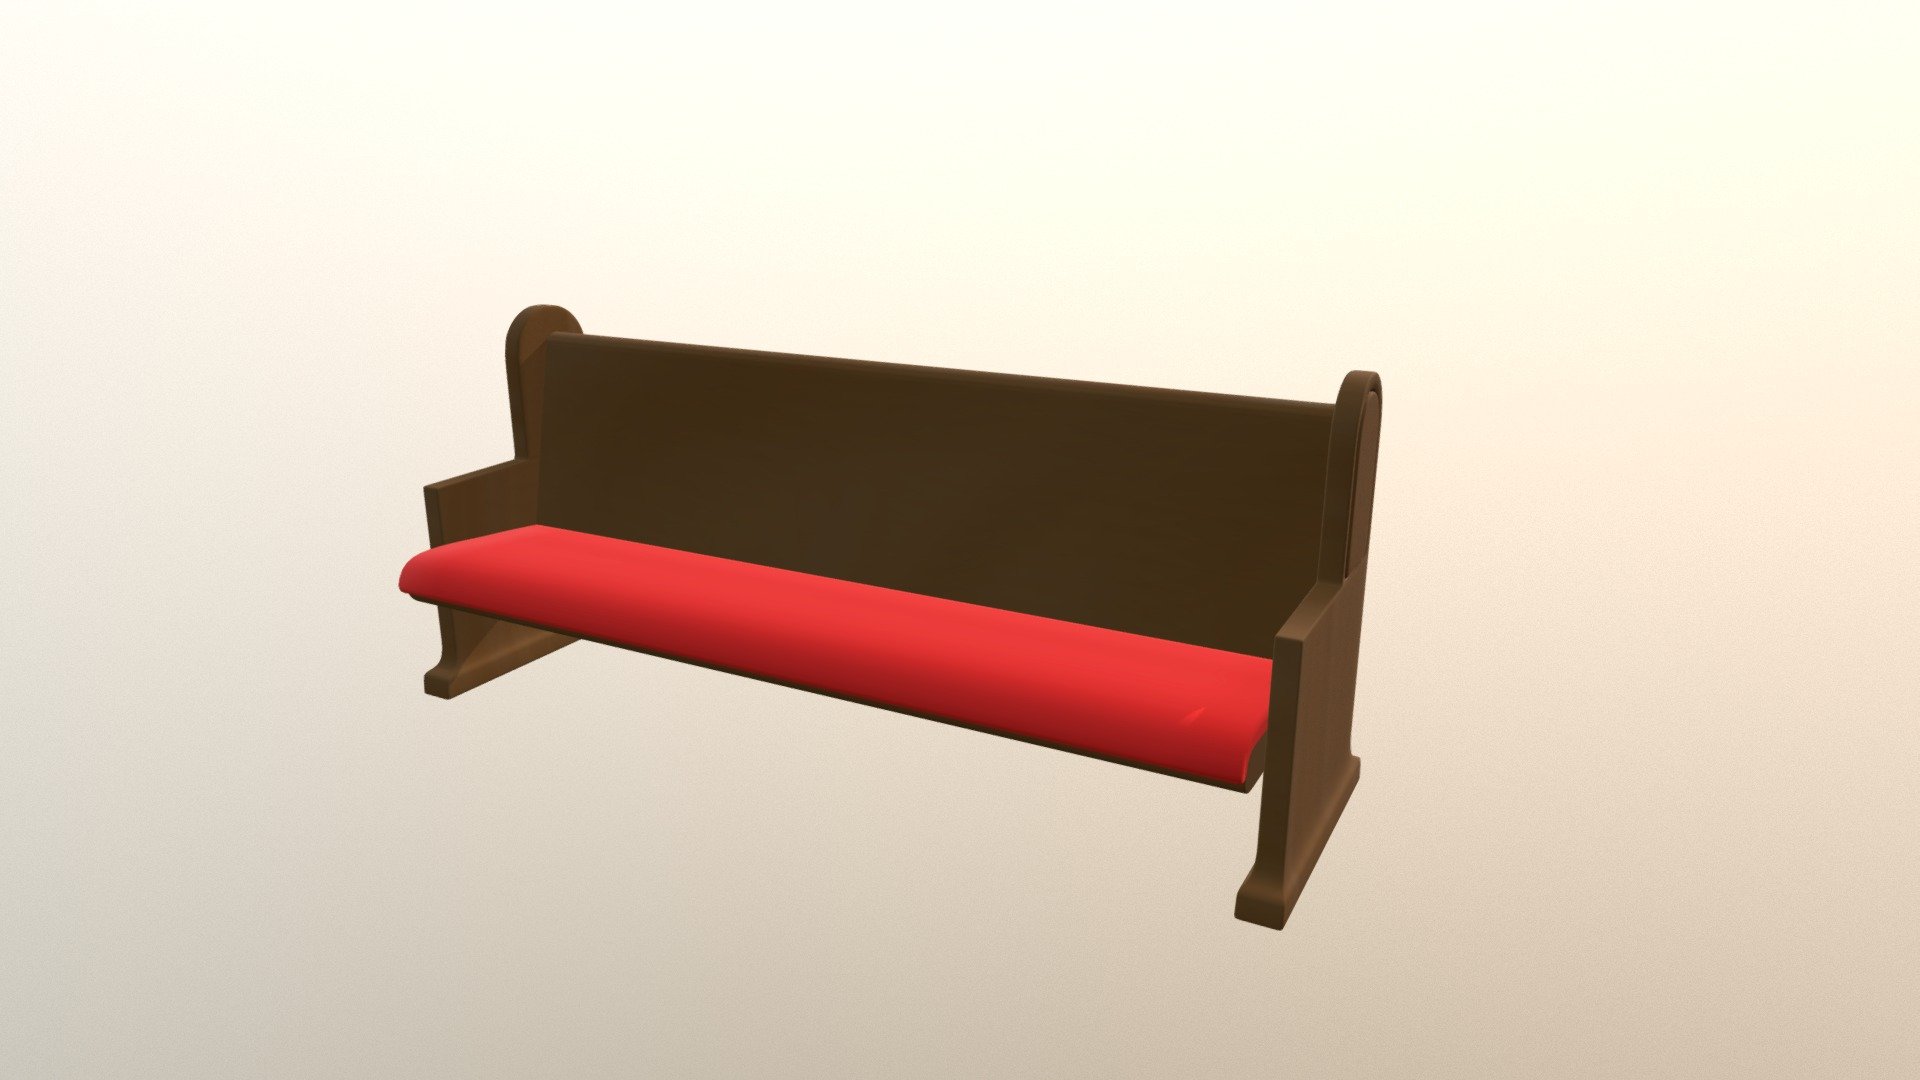 This is the pew for the church asset pack 3d model